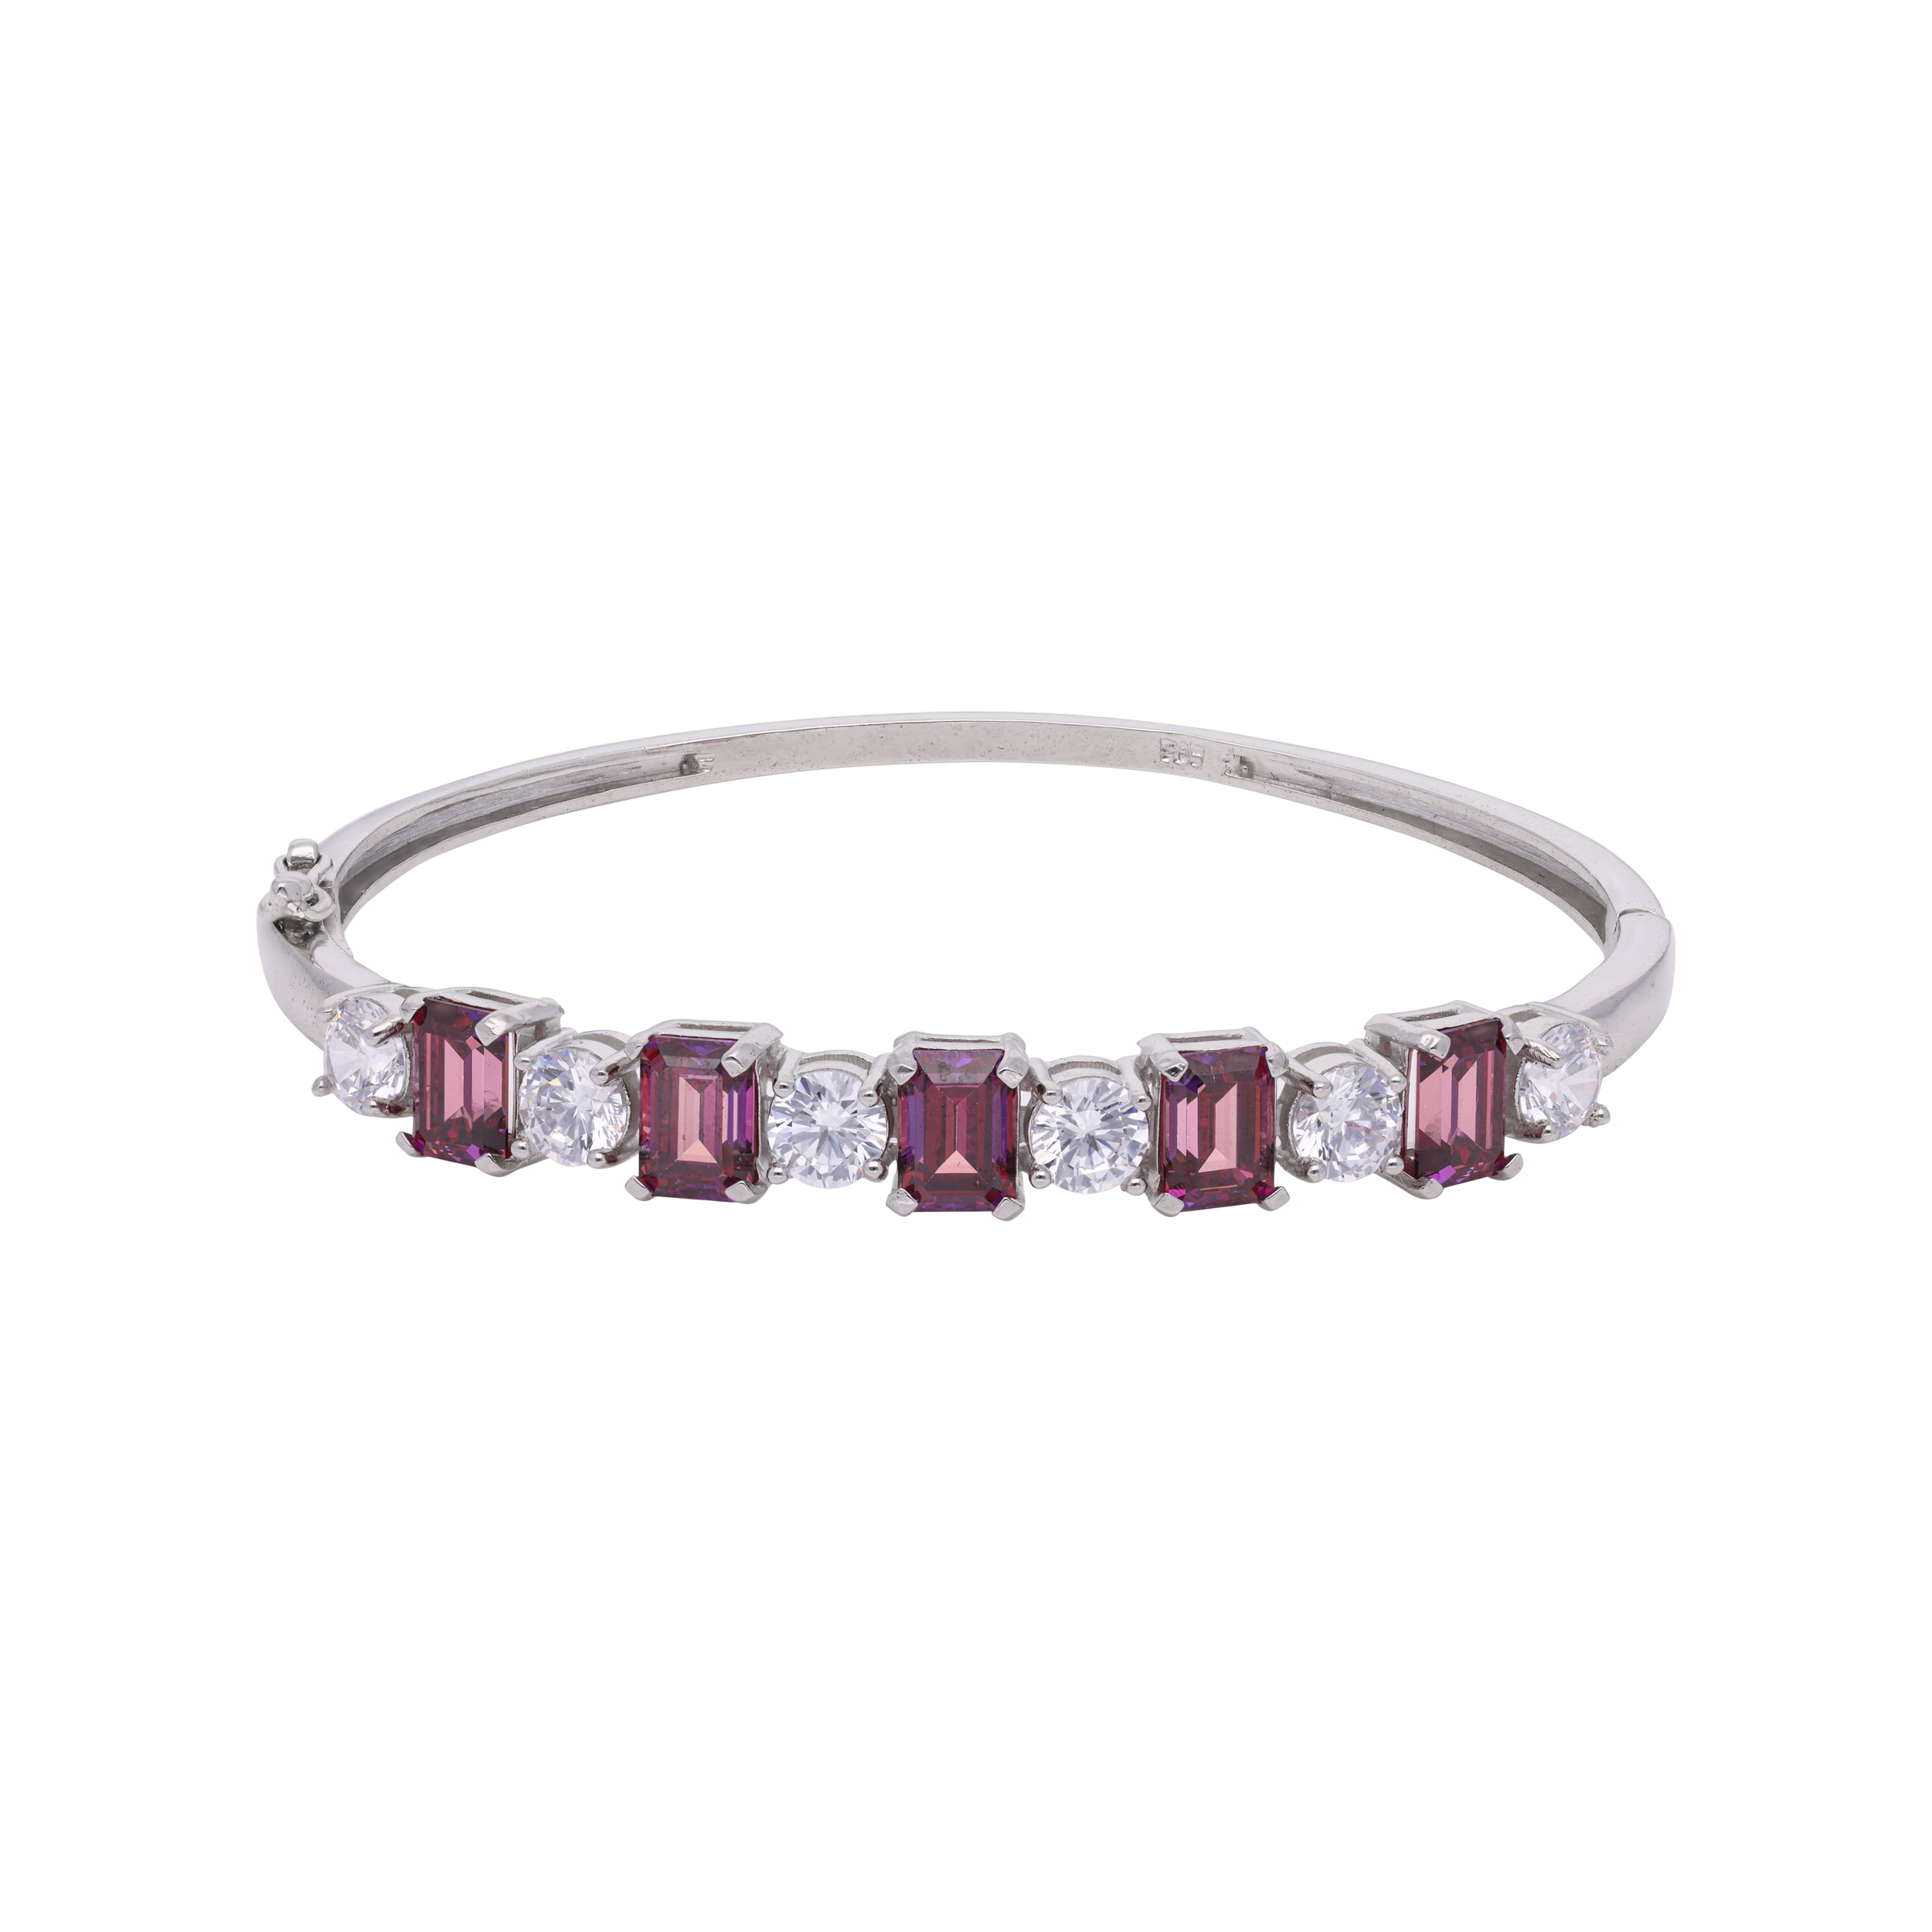 Sterling Silver Openable Stiff Bracelet with Solitaire Cubic Zirconia and Pink Gem | SKU : 0020291495